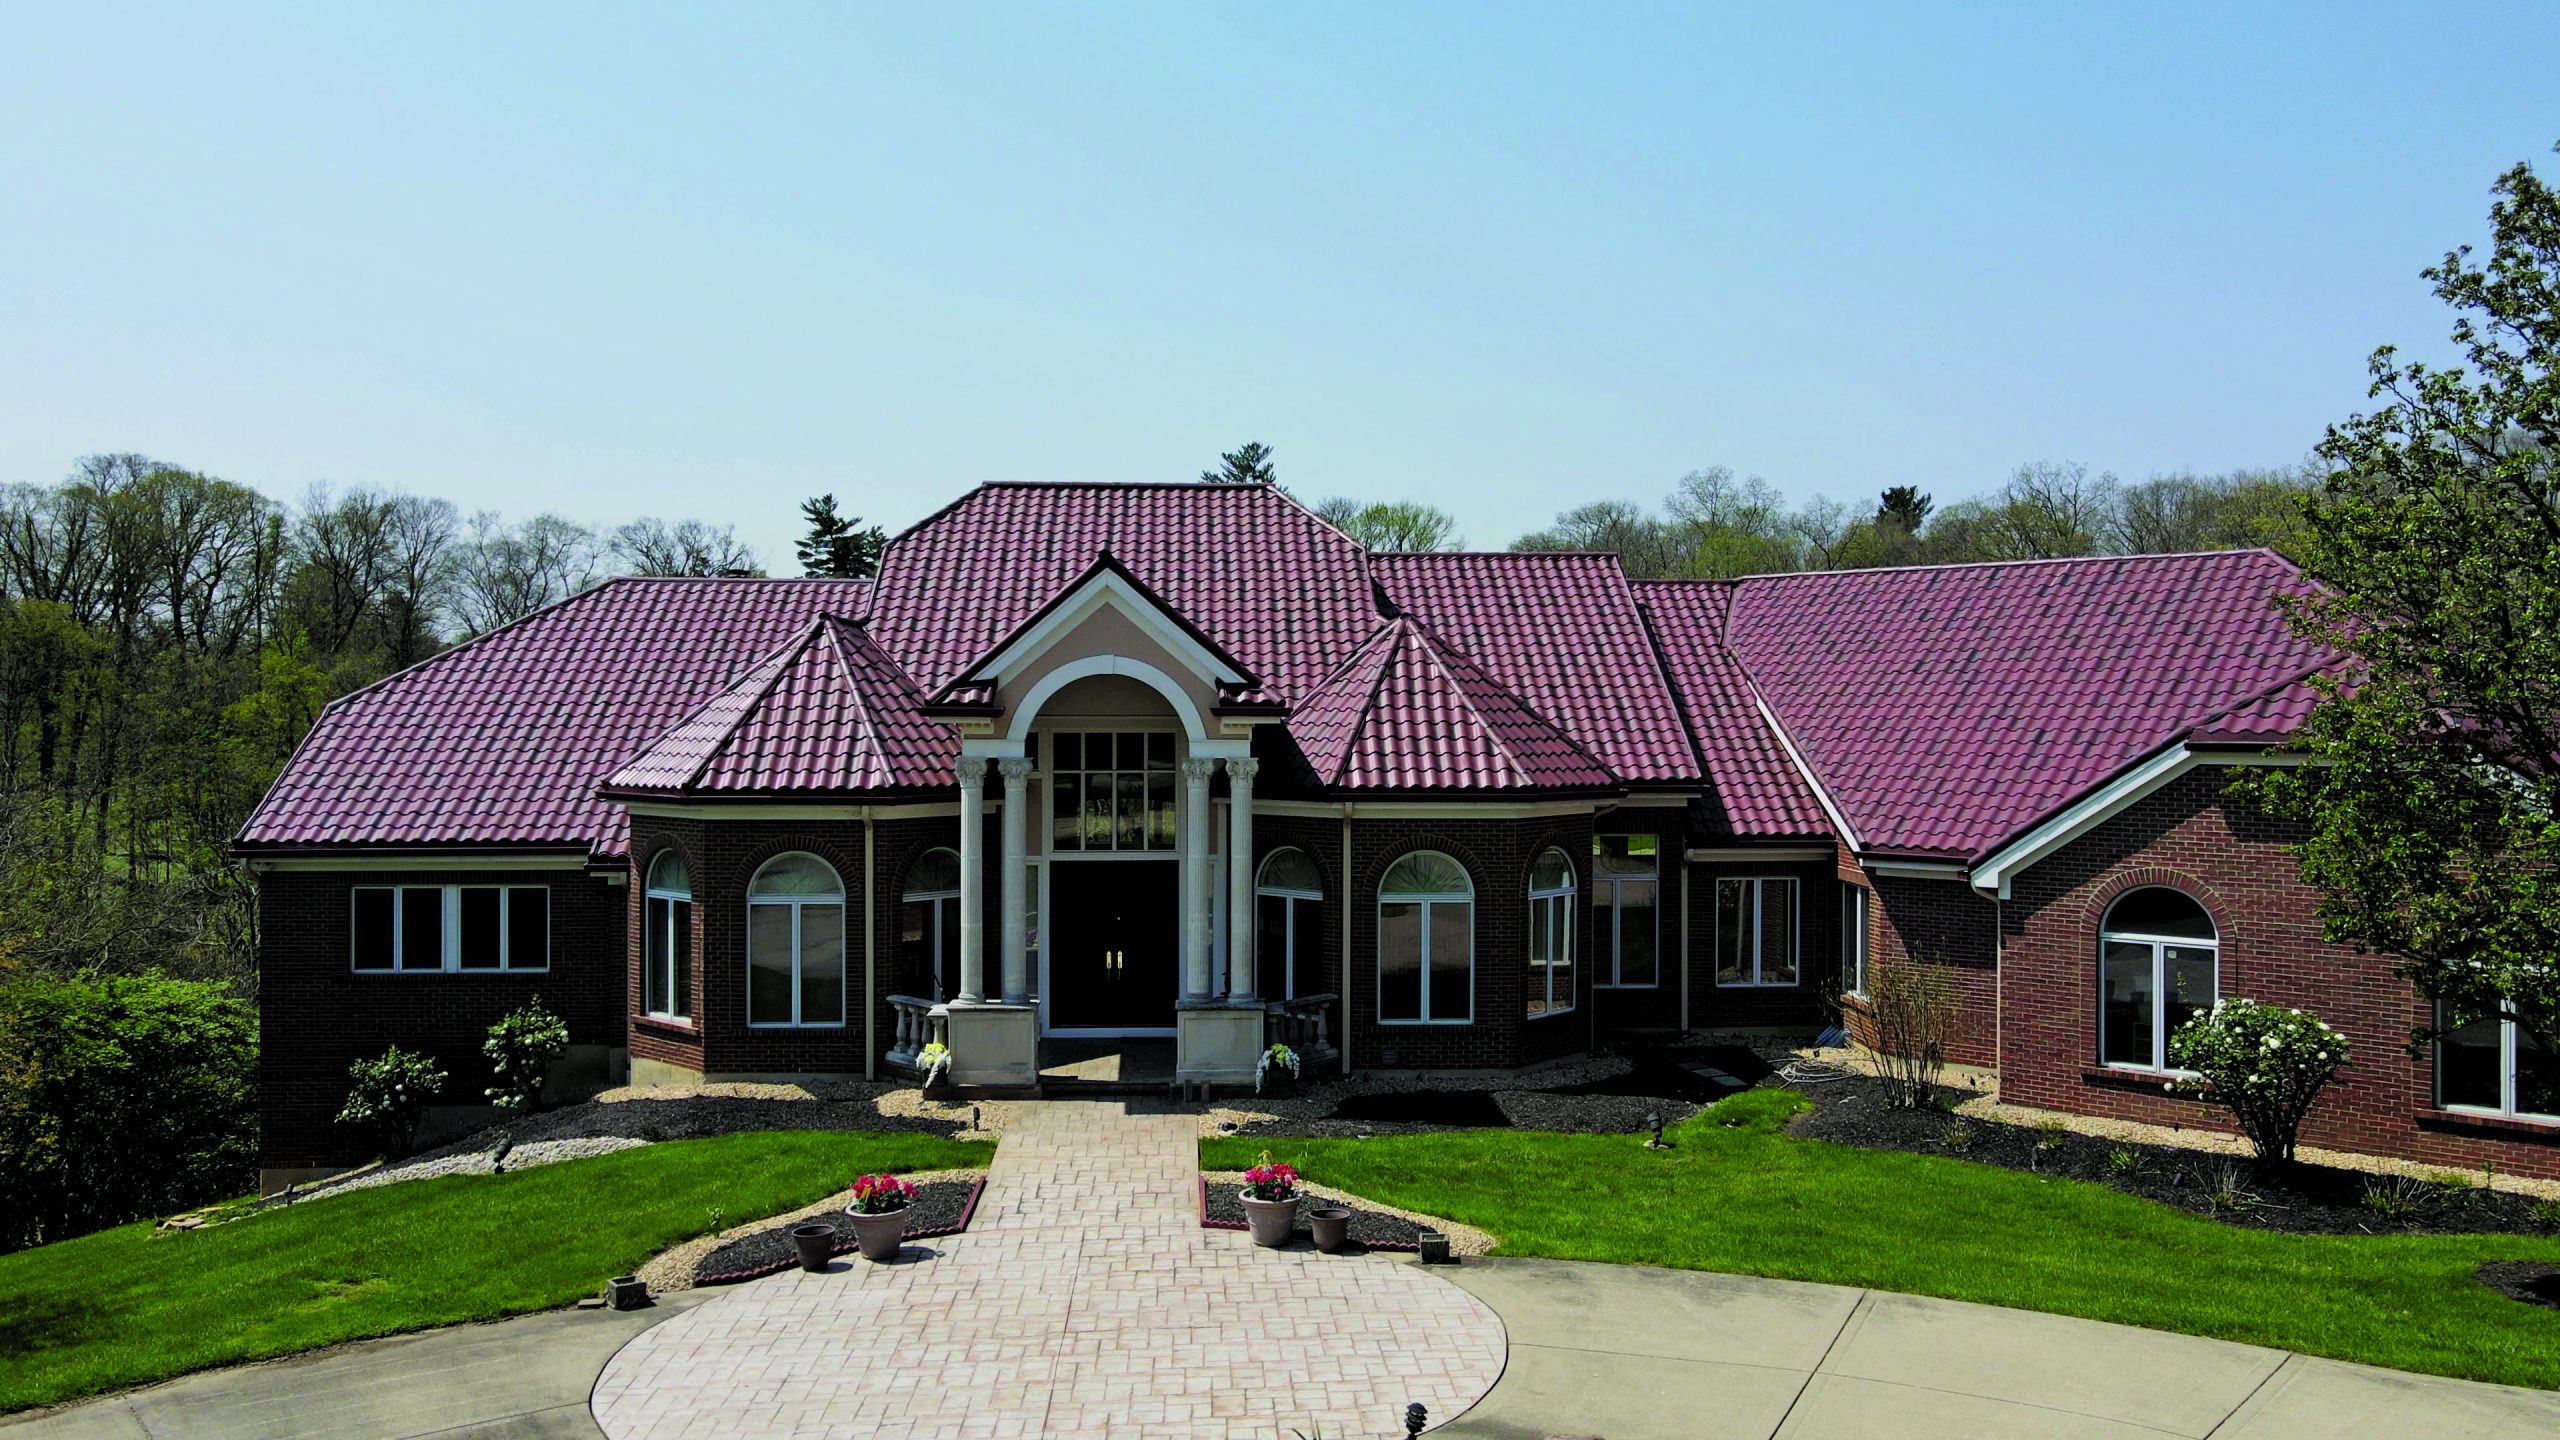 An Outstanding Residential Roof